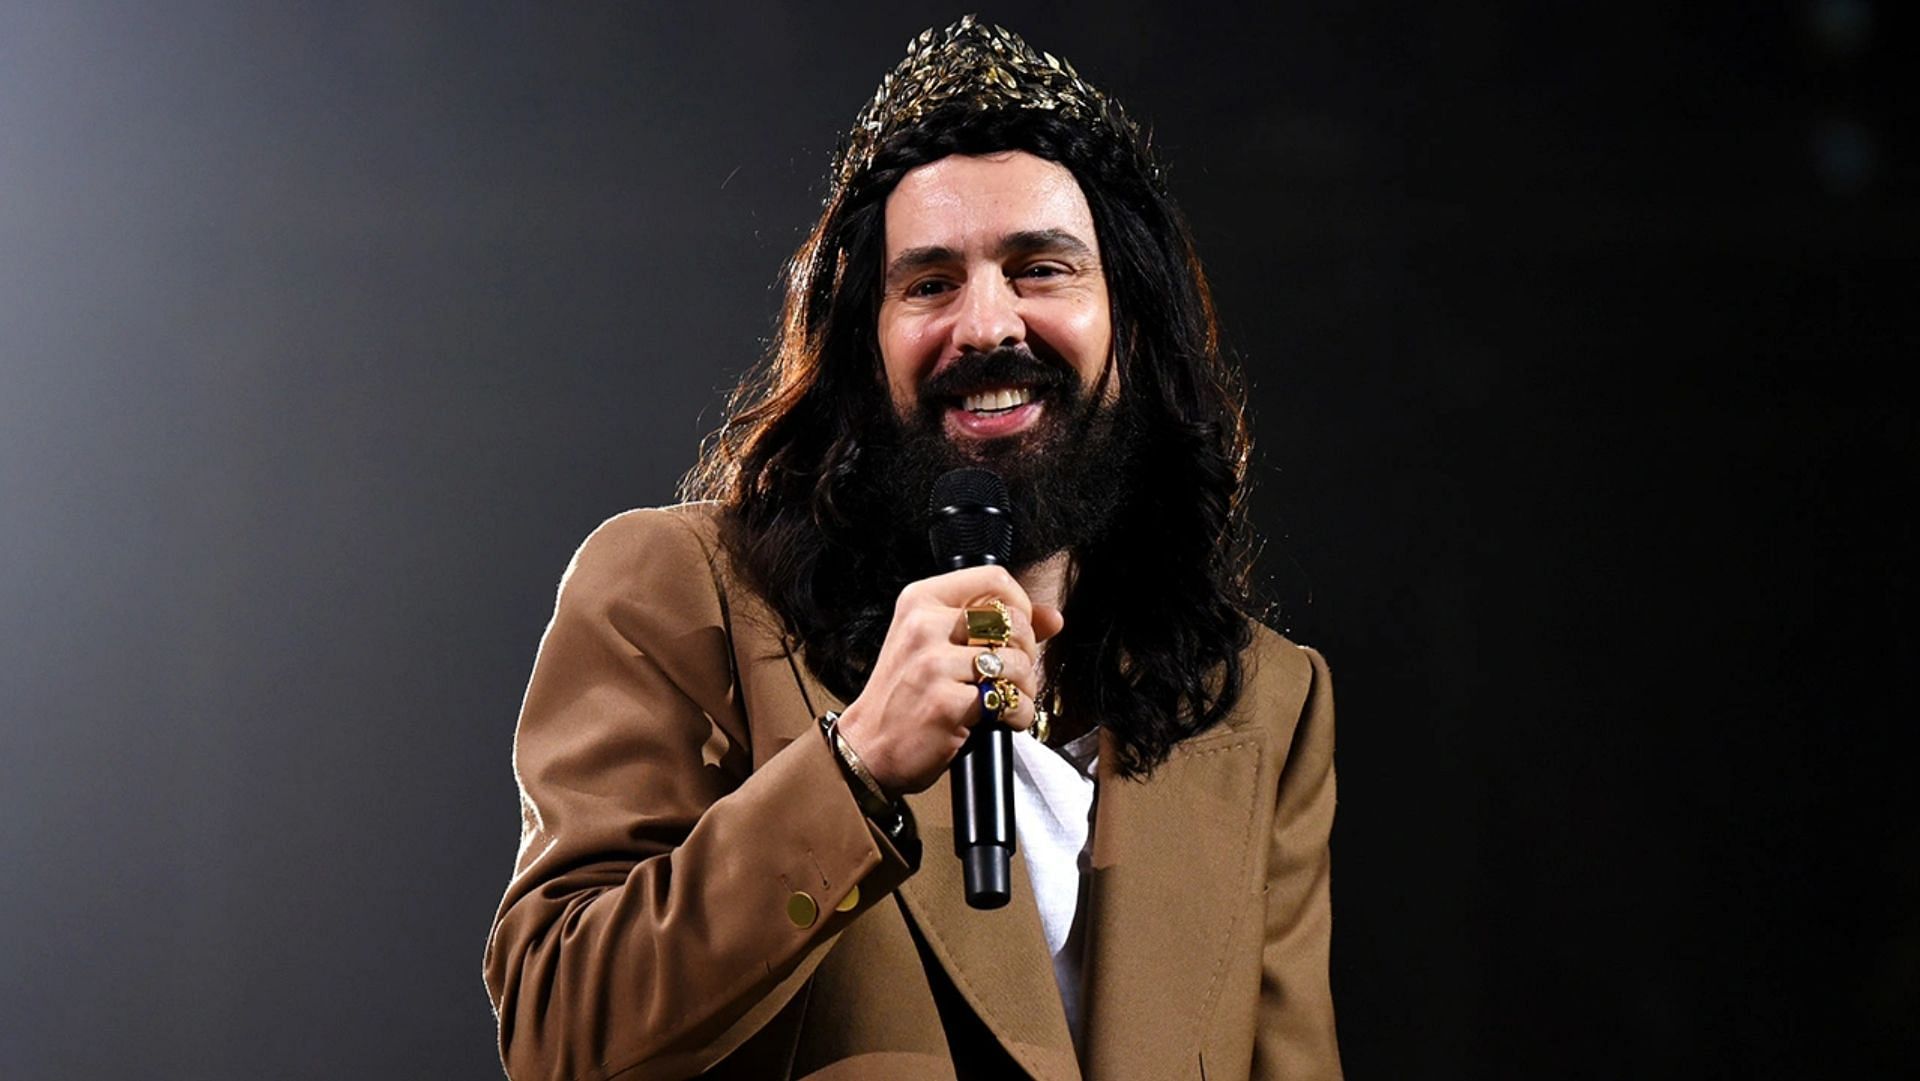 Alessandro Michele was appointed as the creative director of Gucci in 2015. (Image via Joe Maher/BFC/Getty)